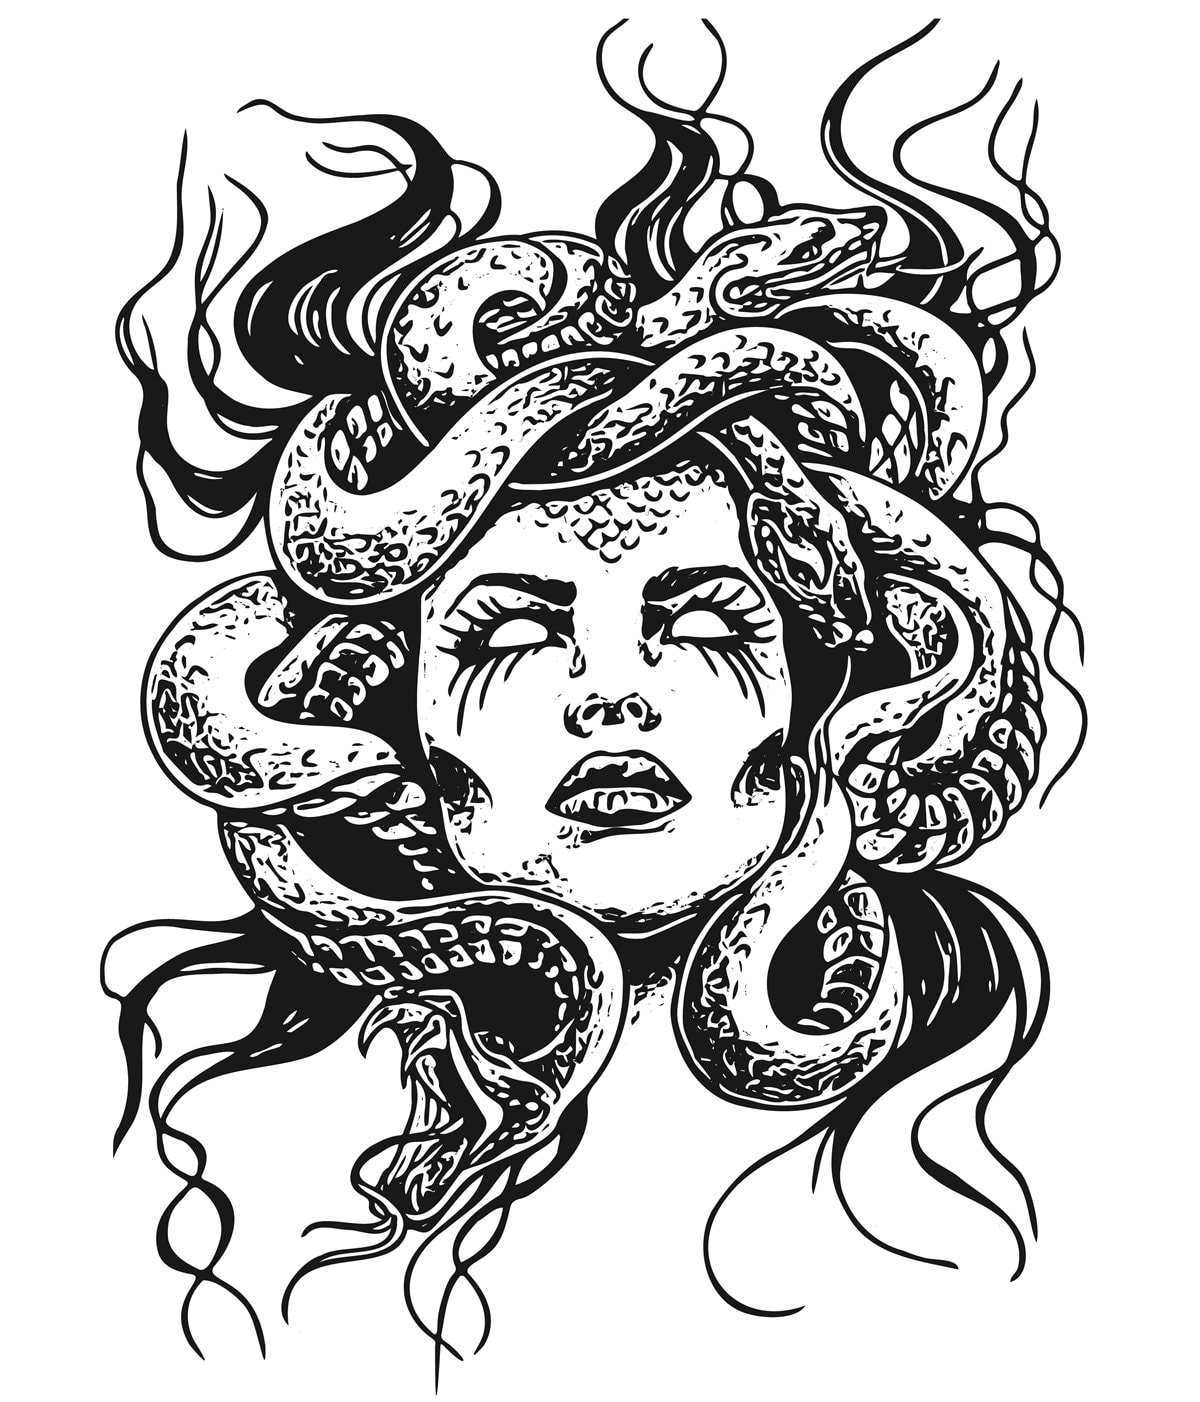 The most famous of the monster figures known as Gorgons in Greek mythology, Medusa has become a symbol of survival and strength to sexual assault victims